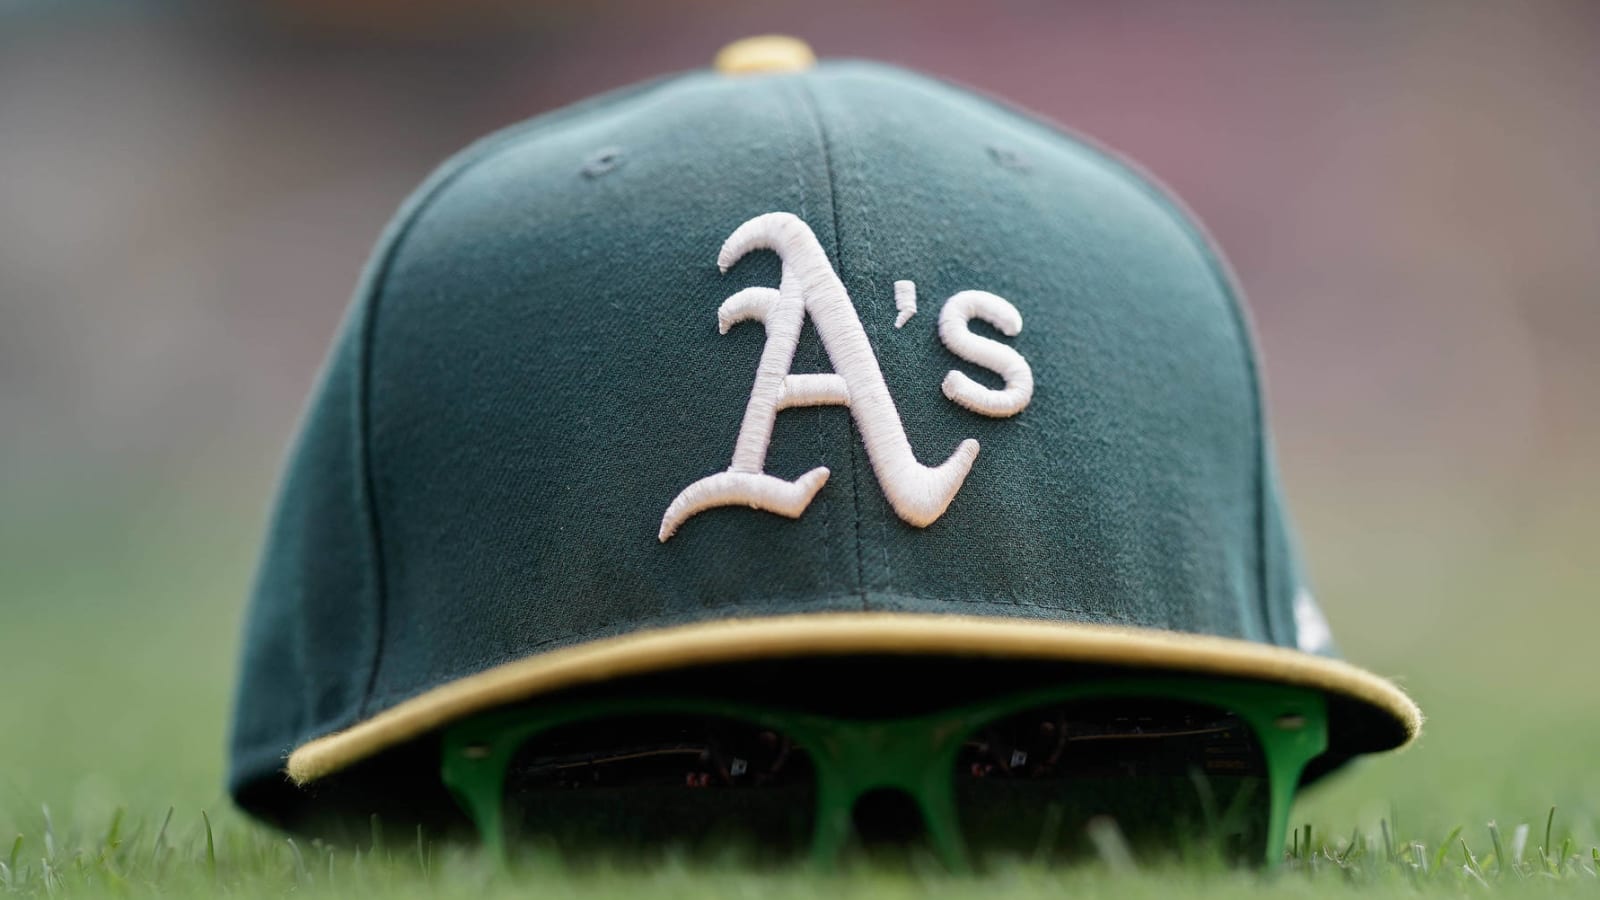 Athletics-Astros game postponed; A's have positive COVID-19 test